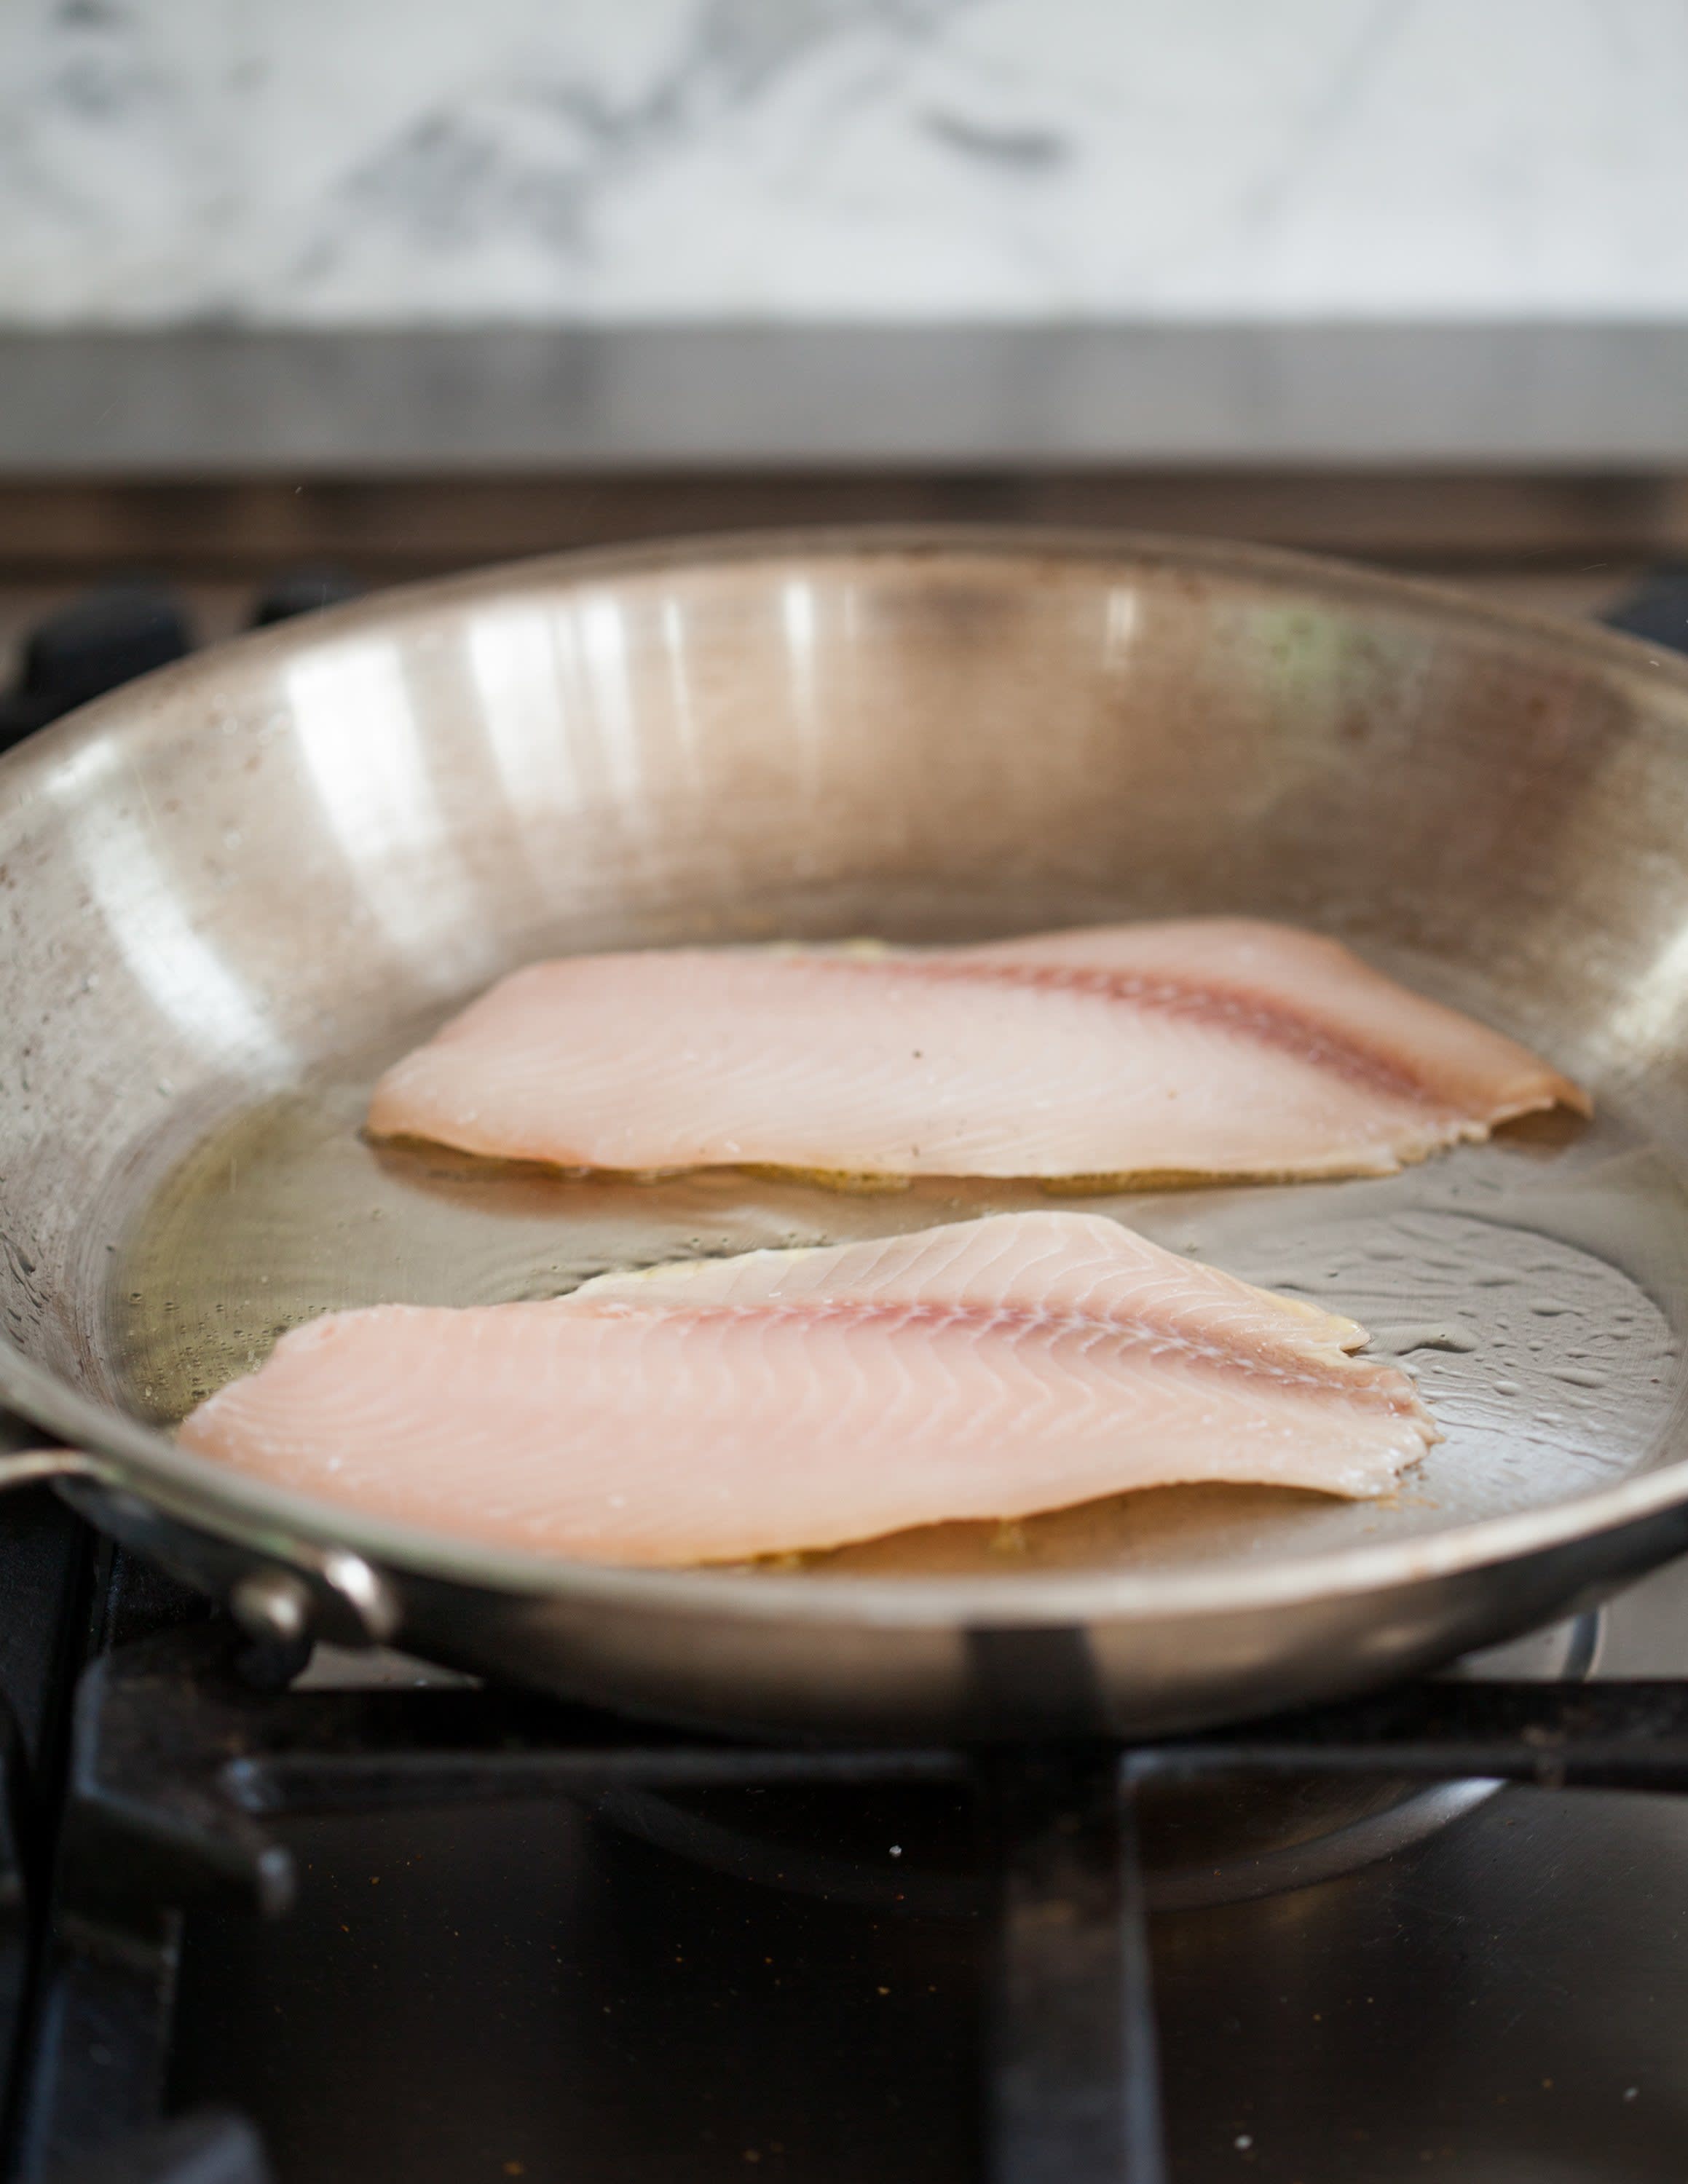 How to Pan-Fry Fish